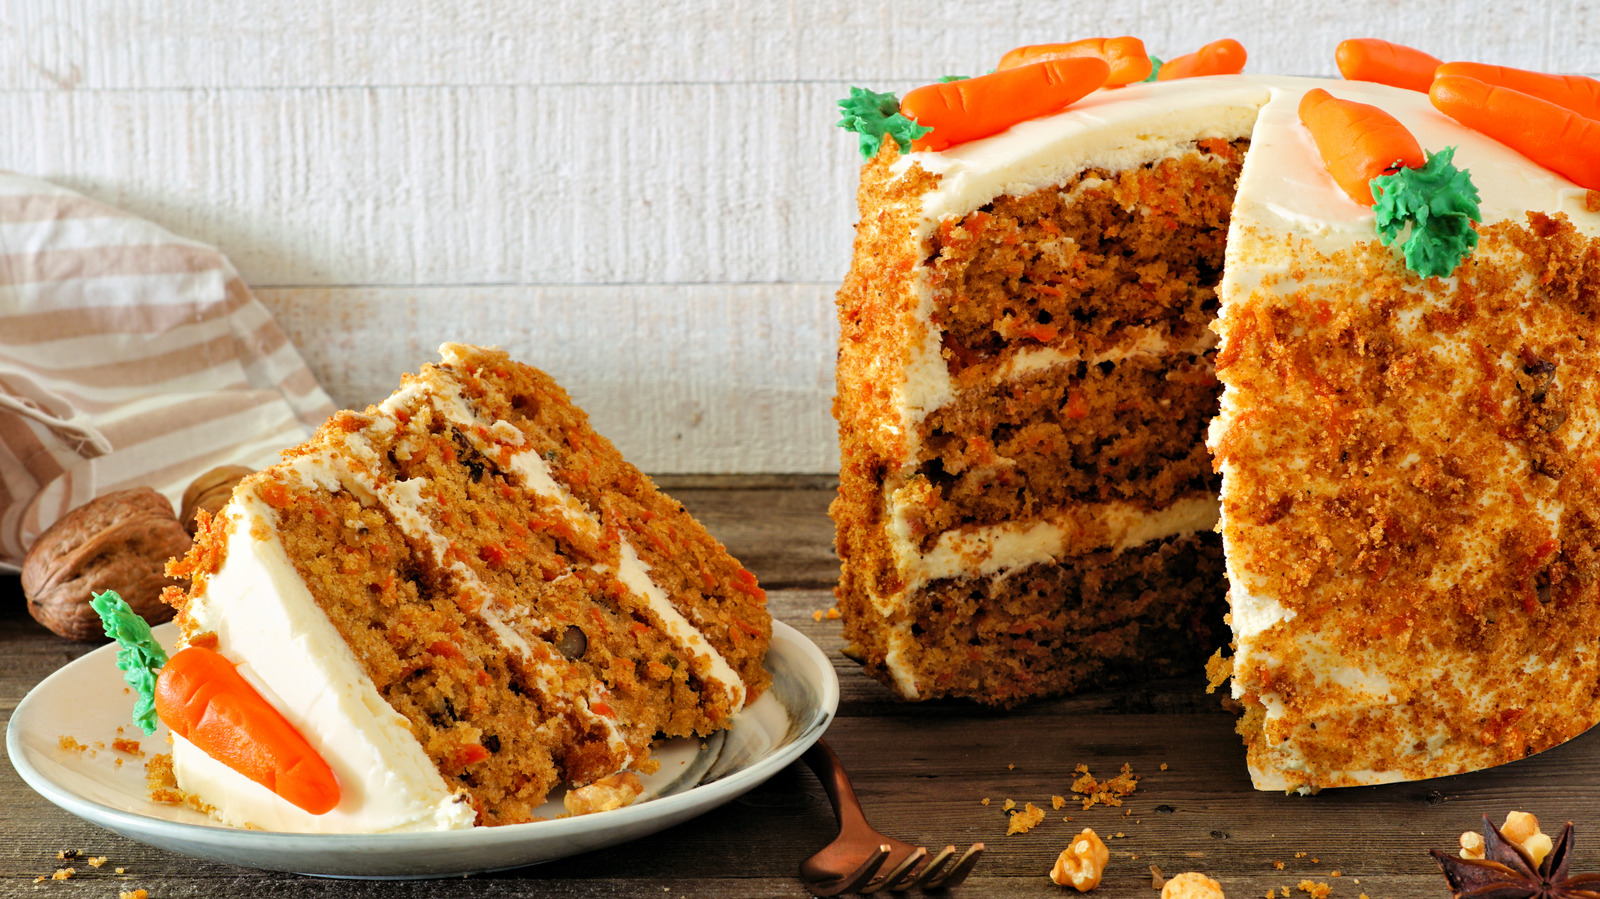 https://www.thedailymeal.com/img/gallery/13-ingredients-that-will-elevate-your-carrot-cake/l-intro-1677177693.jpg